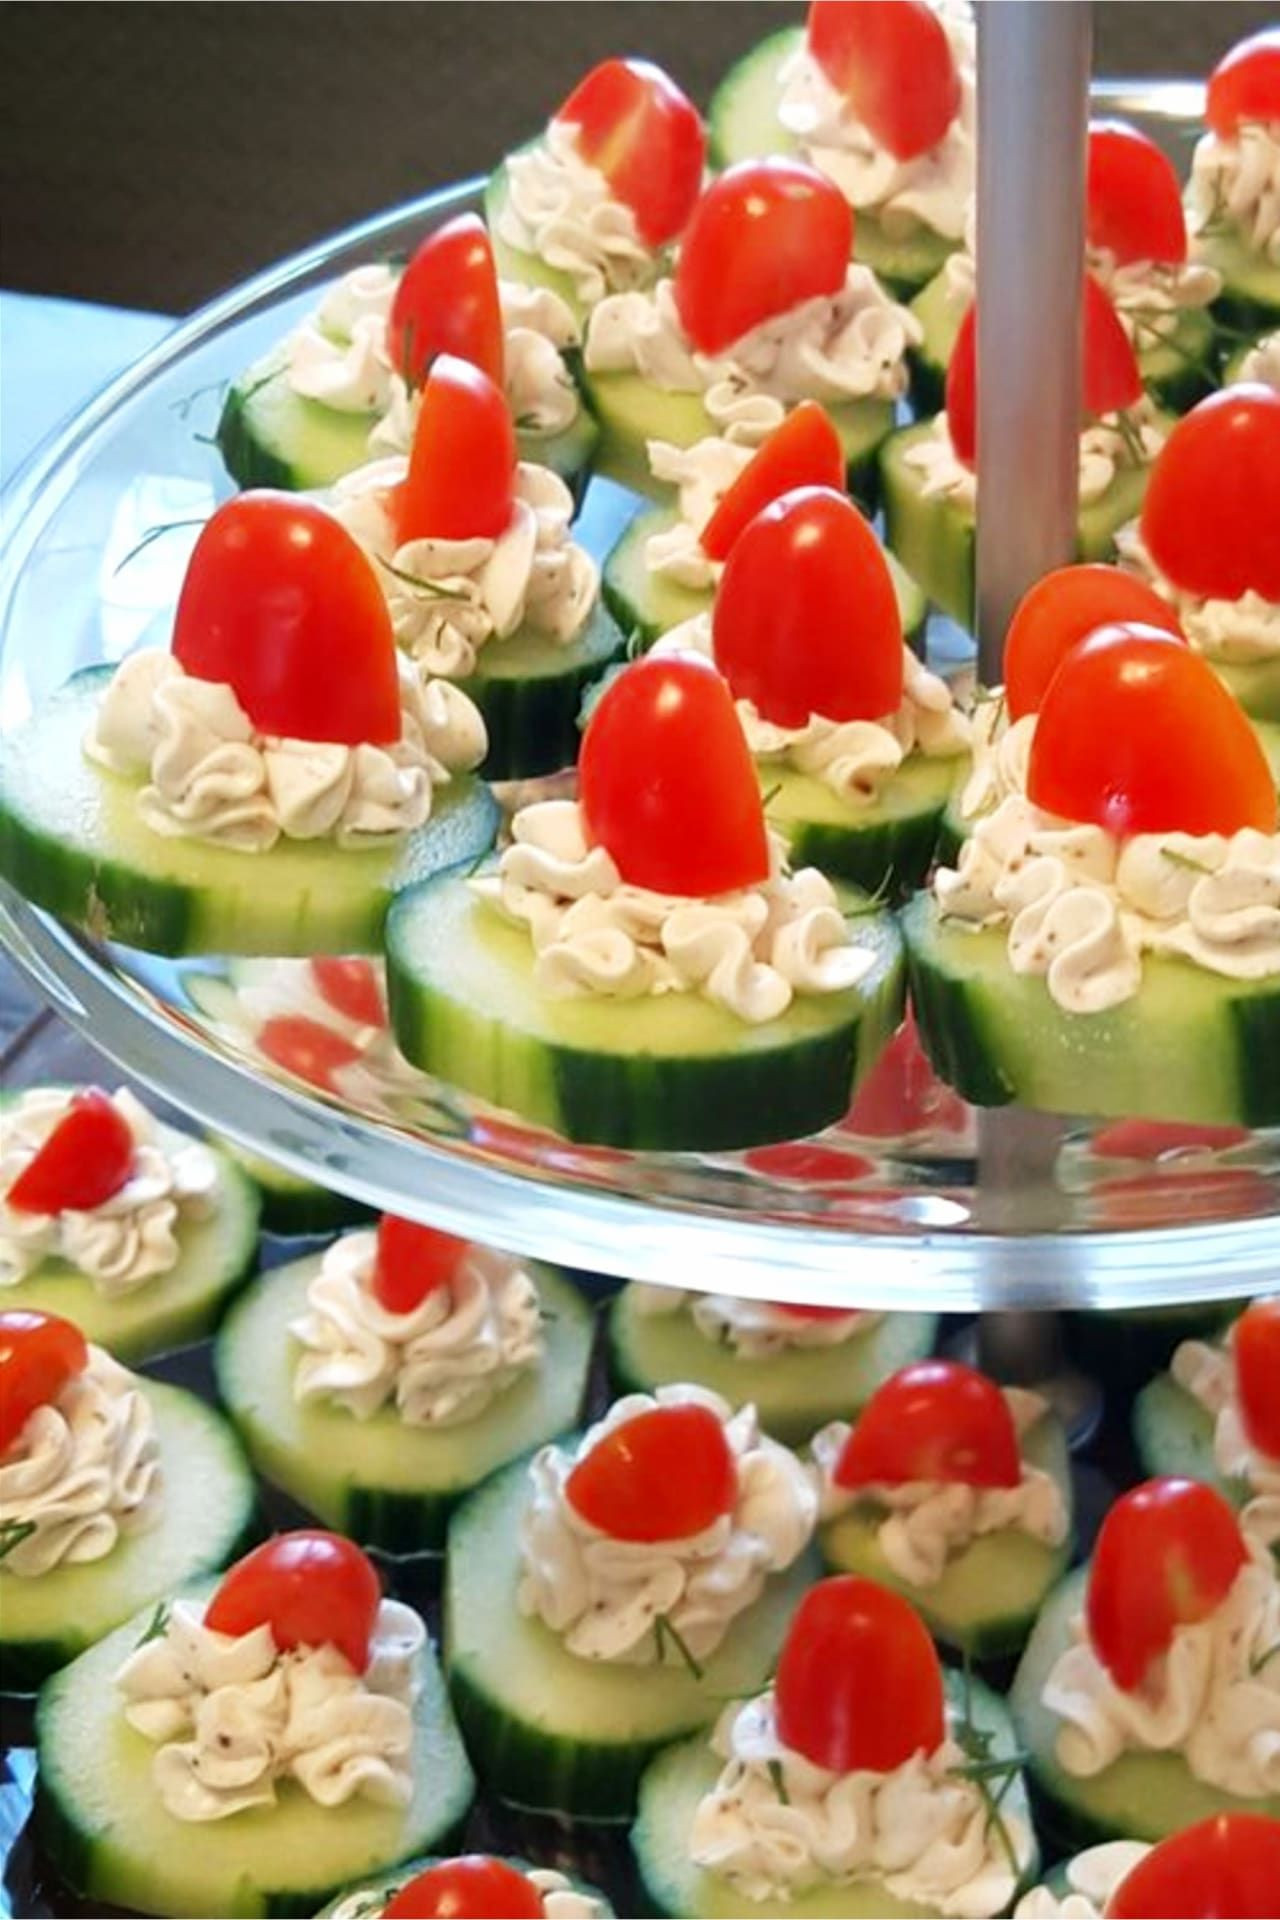 Summer Party Finger Food Ideas
 Easy Party Appetizers For a Crowd 15 Insanely Good Crowd